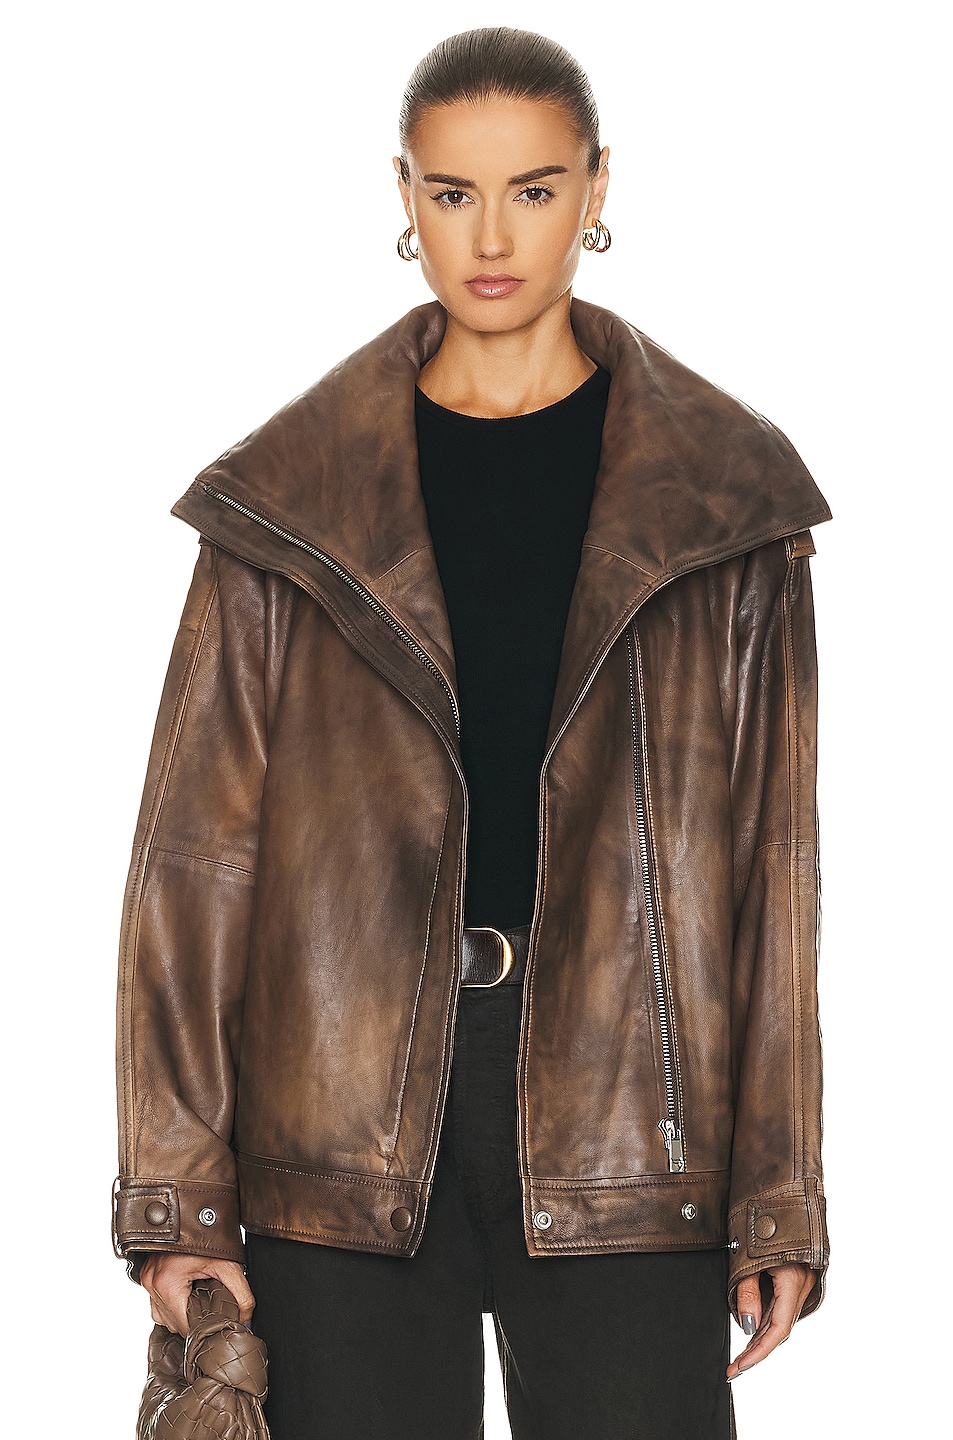 Image 1 of REMAIN Leather Oversized Jacket in BROWN SUGAR COMB.